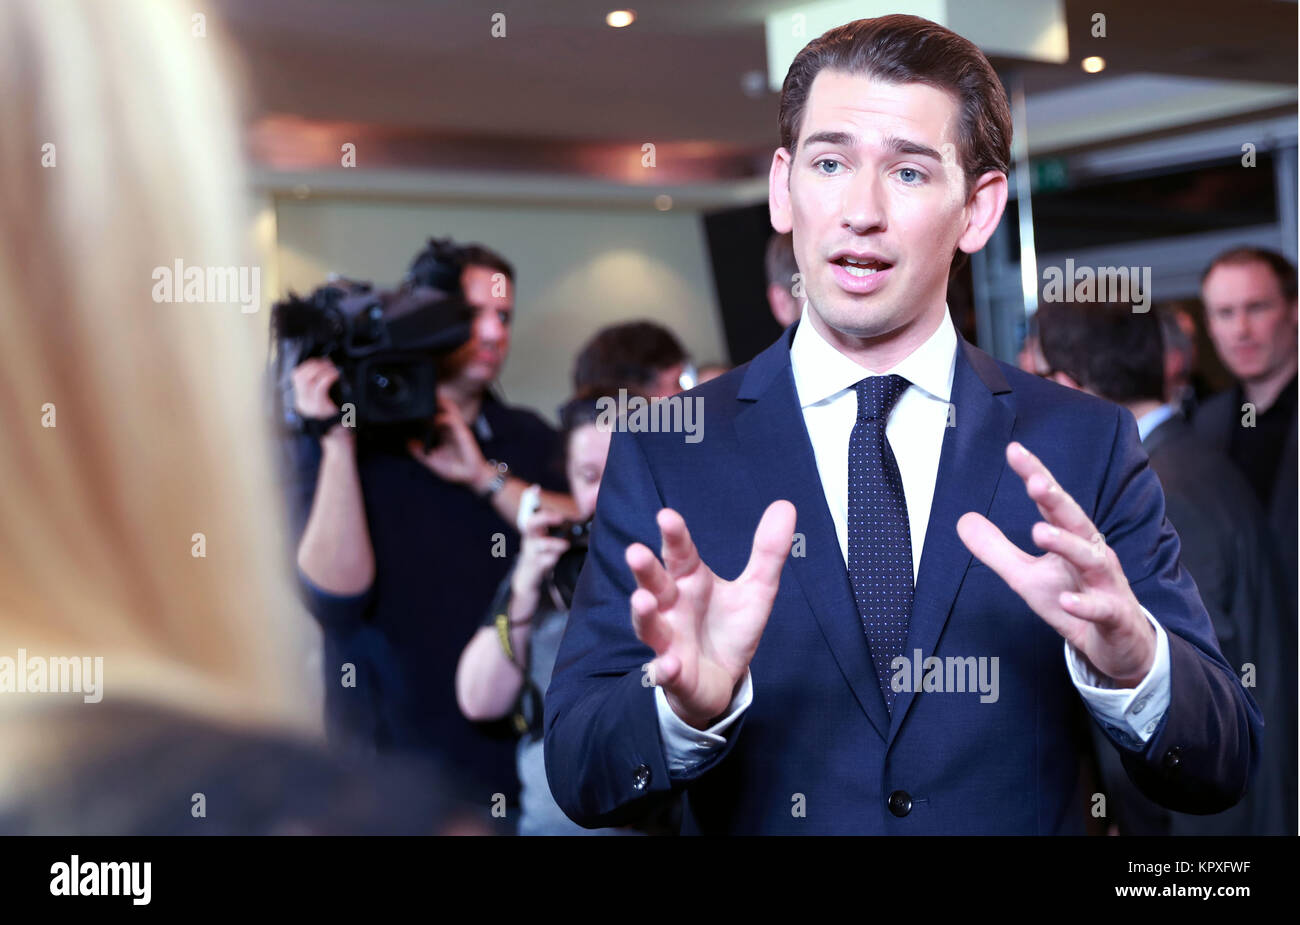 Vienna, Austria. 16th Dec, 2017. Sebastian Kurz, leader of the People's Party, speaks to reporters after a press conference in Vienna, capital of Austria, Dec. 16, 2017. The People's Party and the Freedom Party will form a coalition government for the coming five years. Sebastian Kurz will be the chancellor and Heinz-Christian Strache, leader of the Freedom Party, will be the vice chancellor. Credit: Pan Xu/Xinhua/Alamy Live News Stock Photo